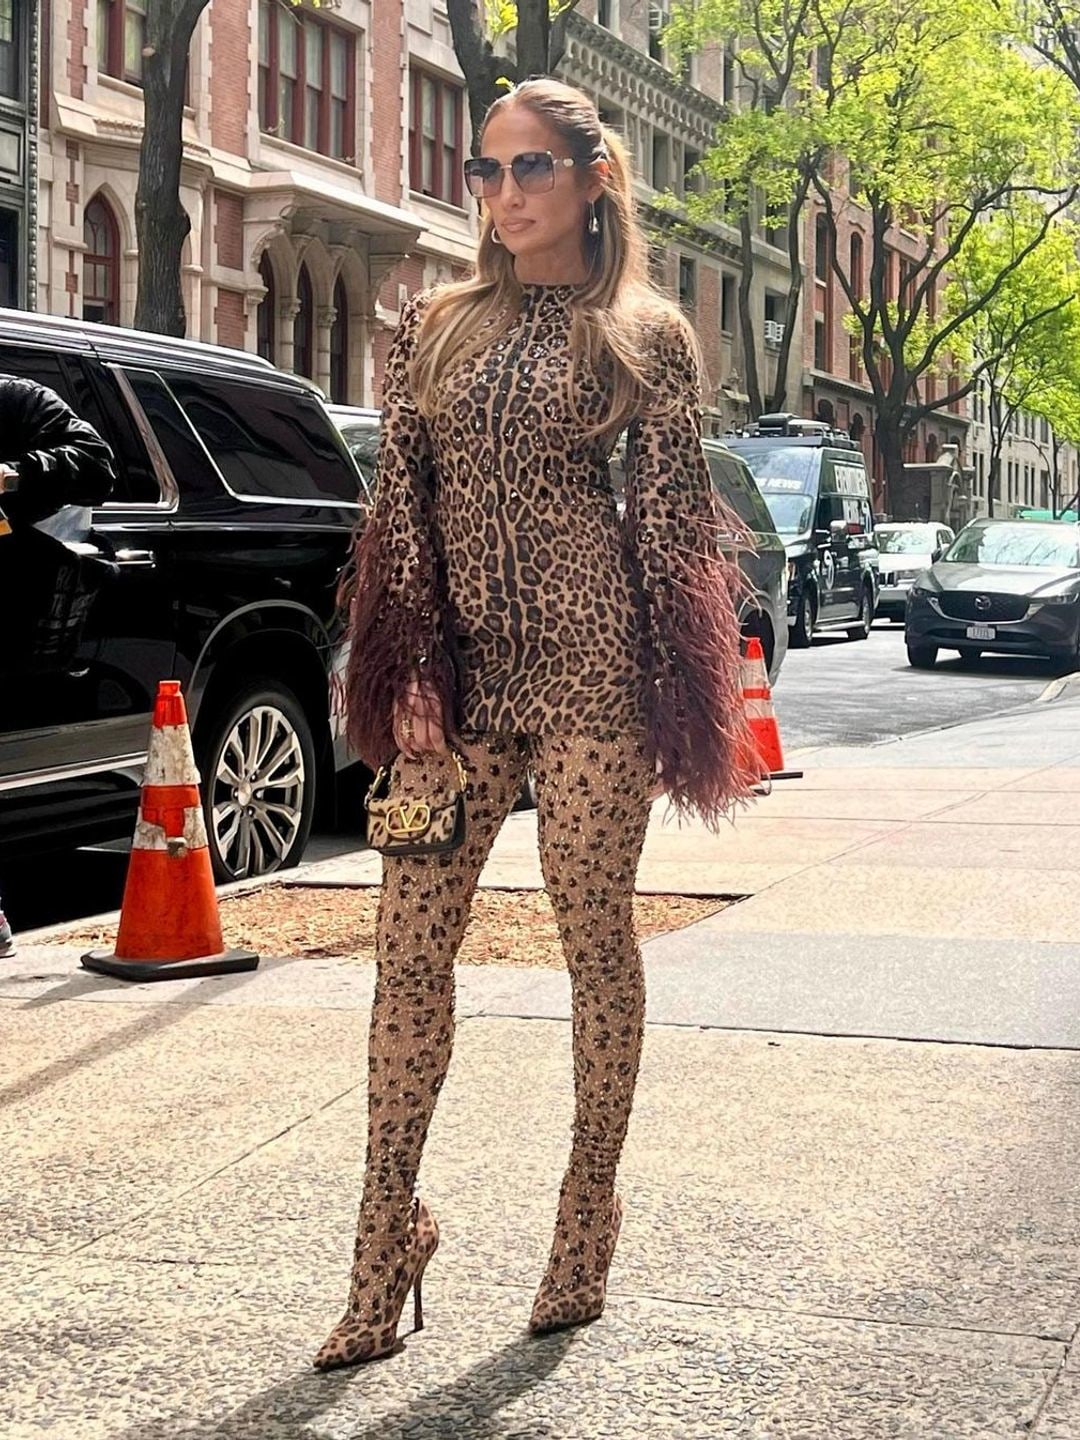 Jennifer Lopez wears a full animal print outfit on the streets of NYC